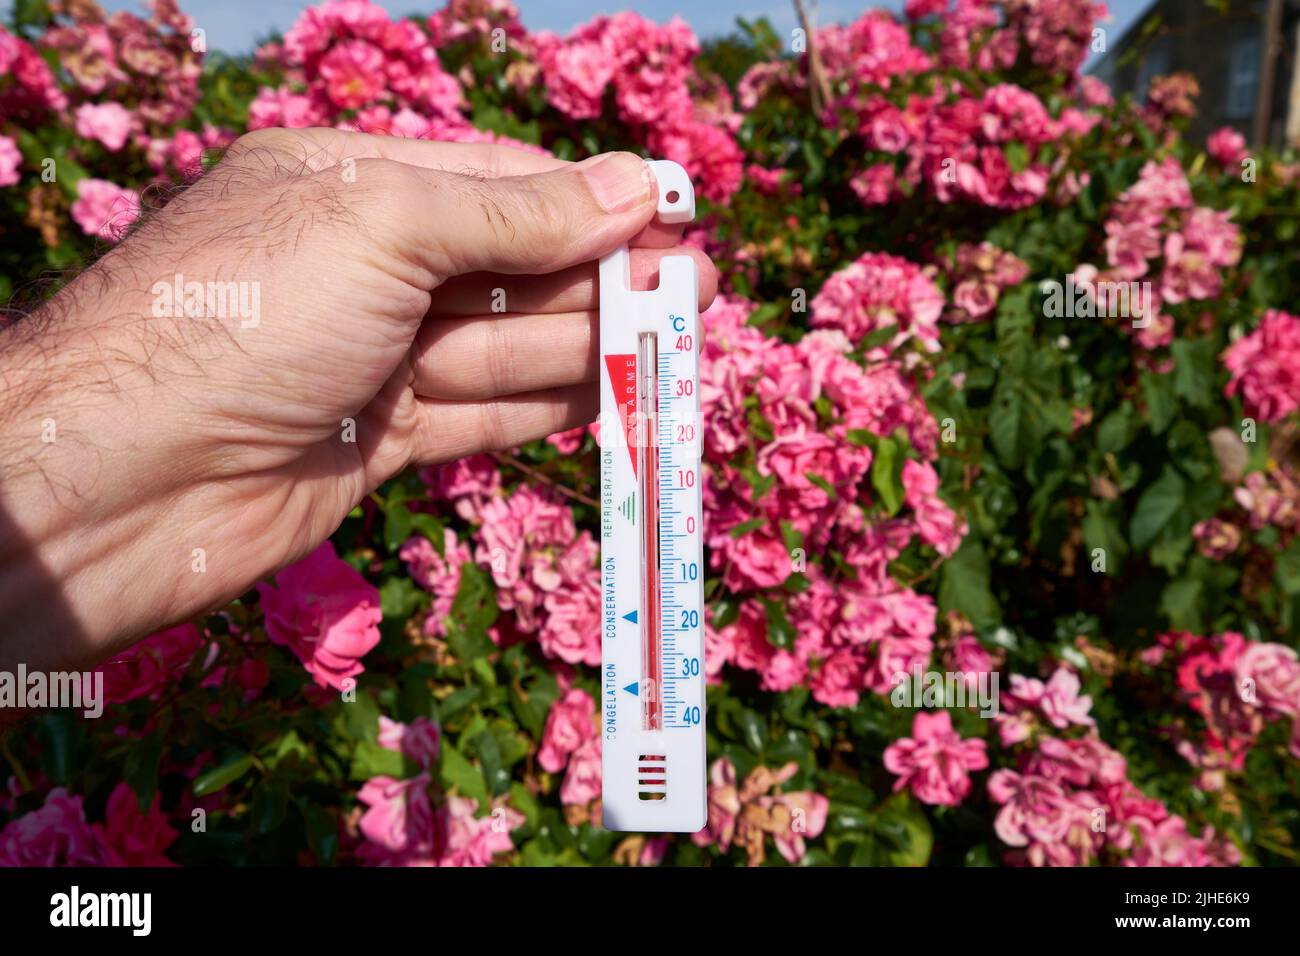 Chippenham, Wiltshire, UK, 18th July, 2022. As the Met Office issues a red extreme heat warning on Monday and Tuesday for much of England, a man is pictured at 9AM holding a thermometer in a garden as temperatures start to rise.  Forecasters are predicting highs of 40C. Credit: Lynchpics/Alamy Live News Stock Photo